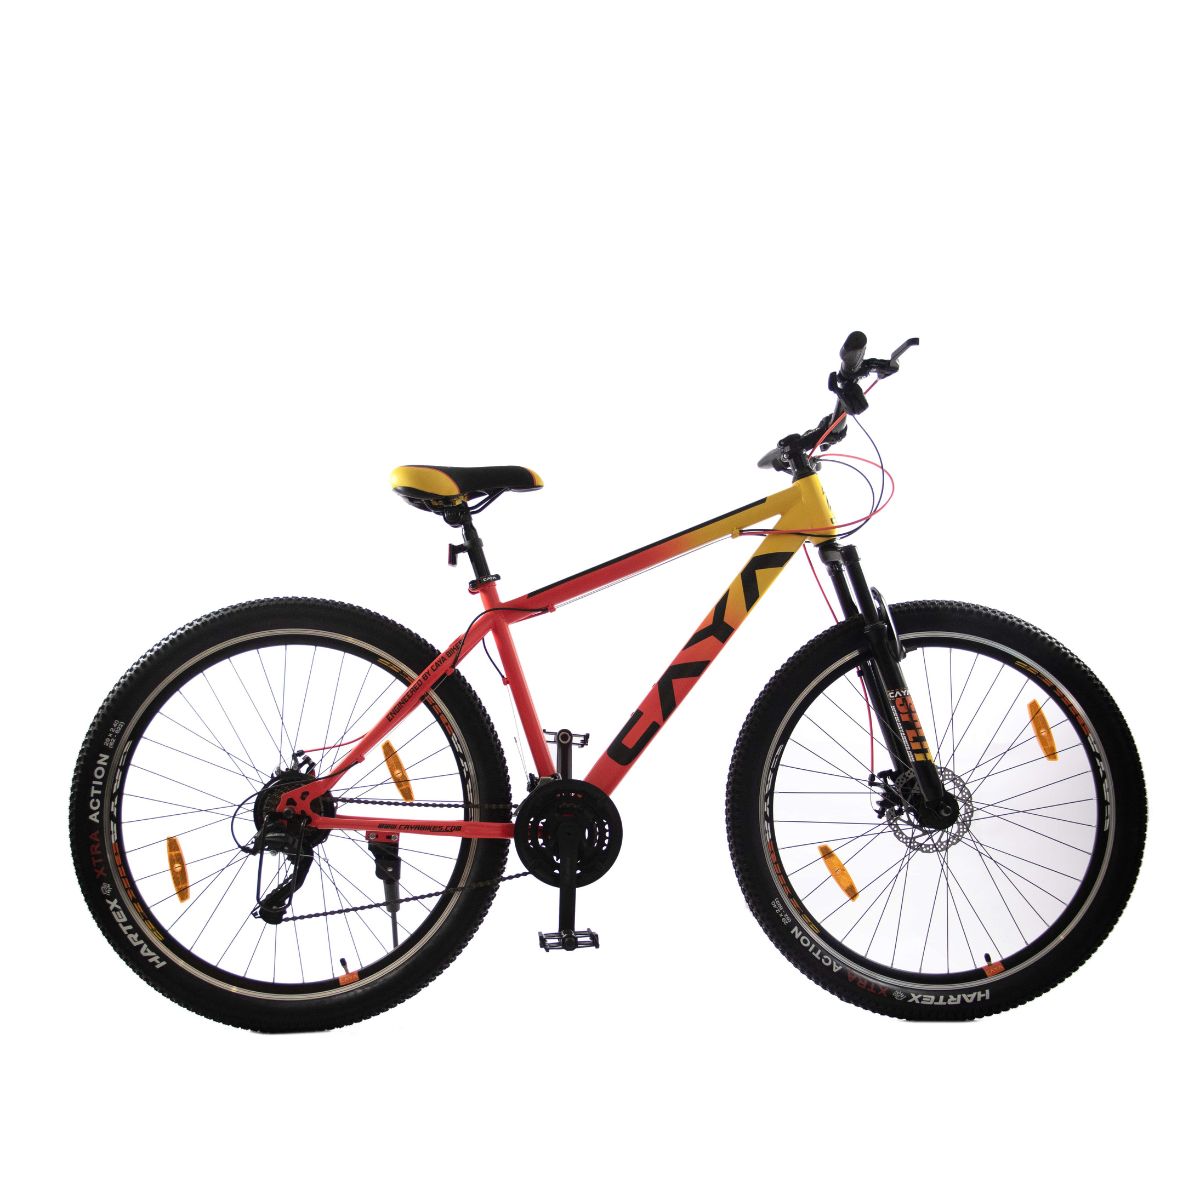 CAYA Split 29 MTB Cycle with Disc Brakes & Suspension 21 Speed Microshift